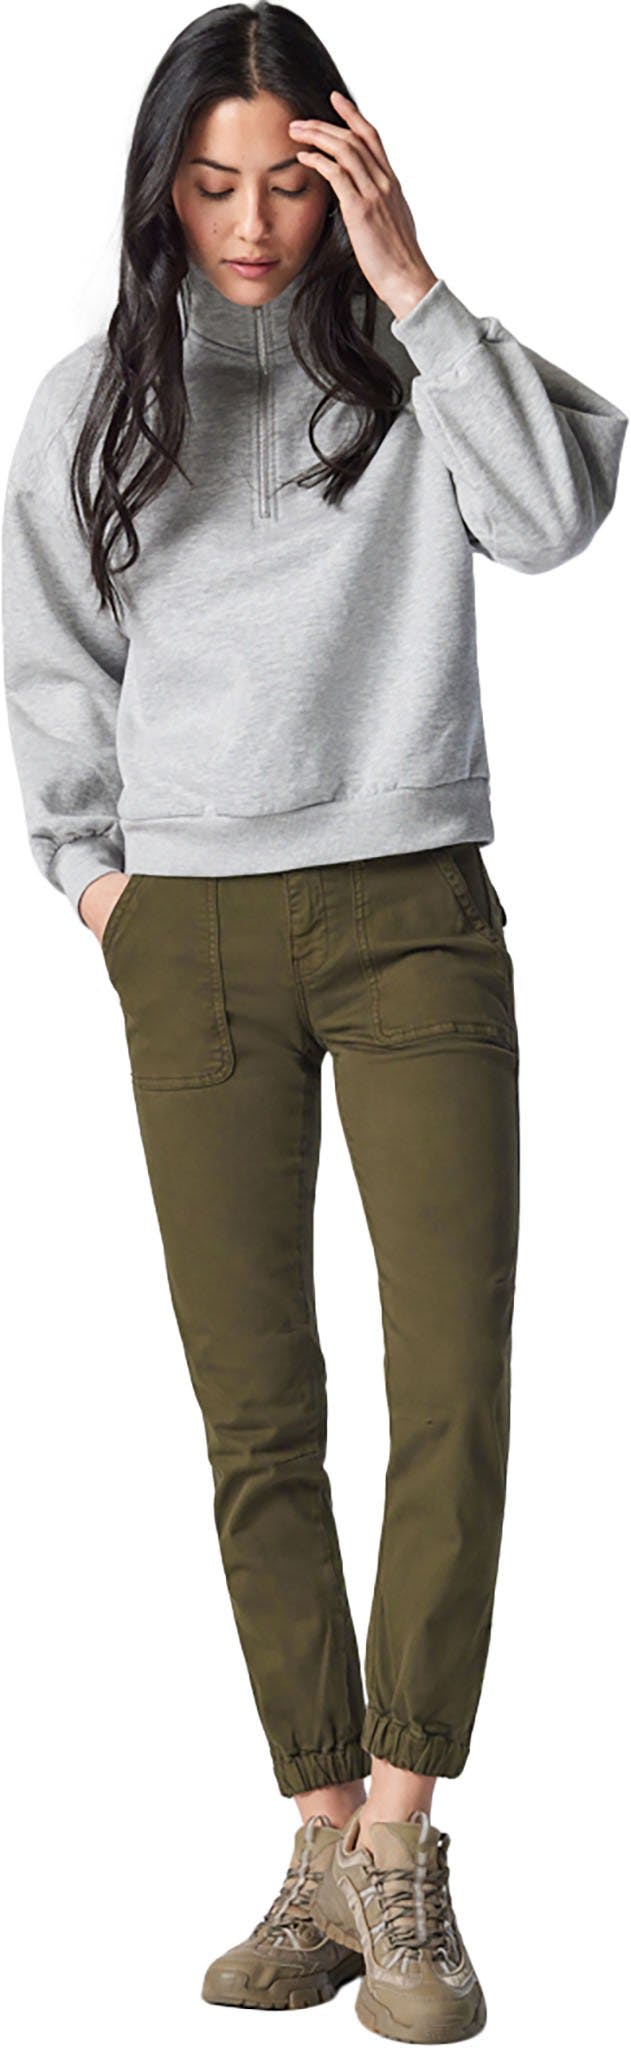 Product image for Ivy Slim Cargo Pants - Women's